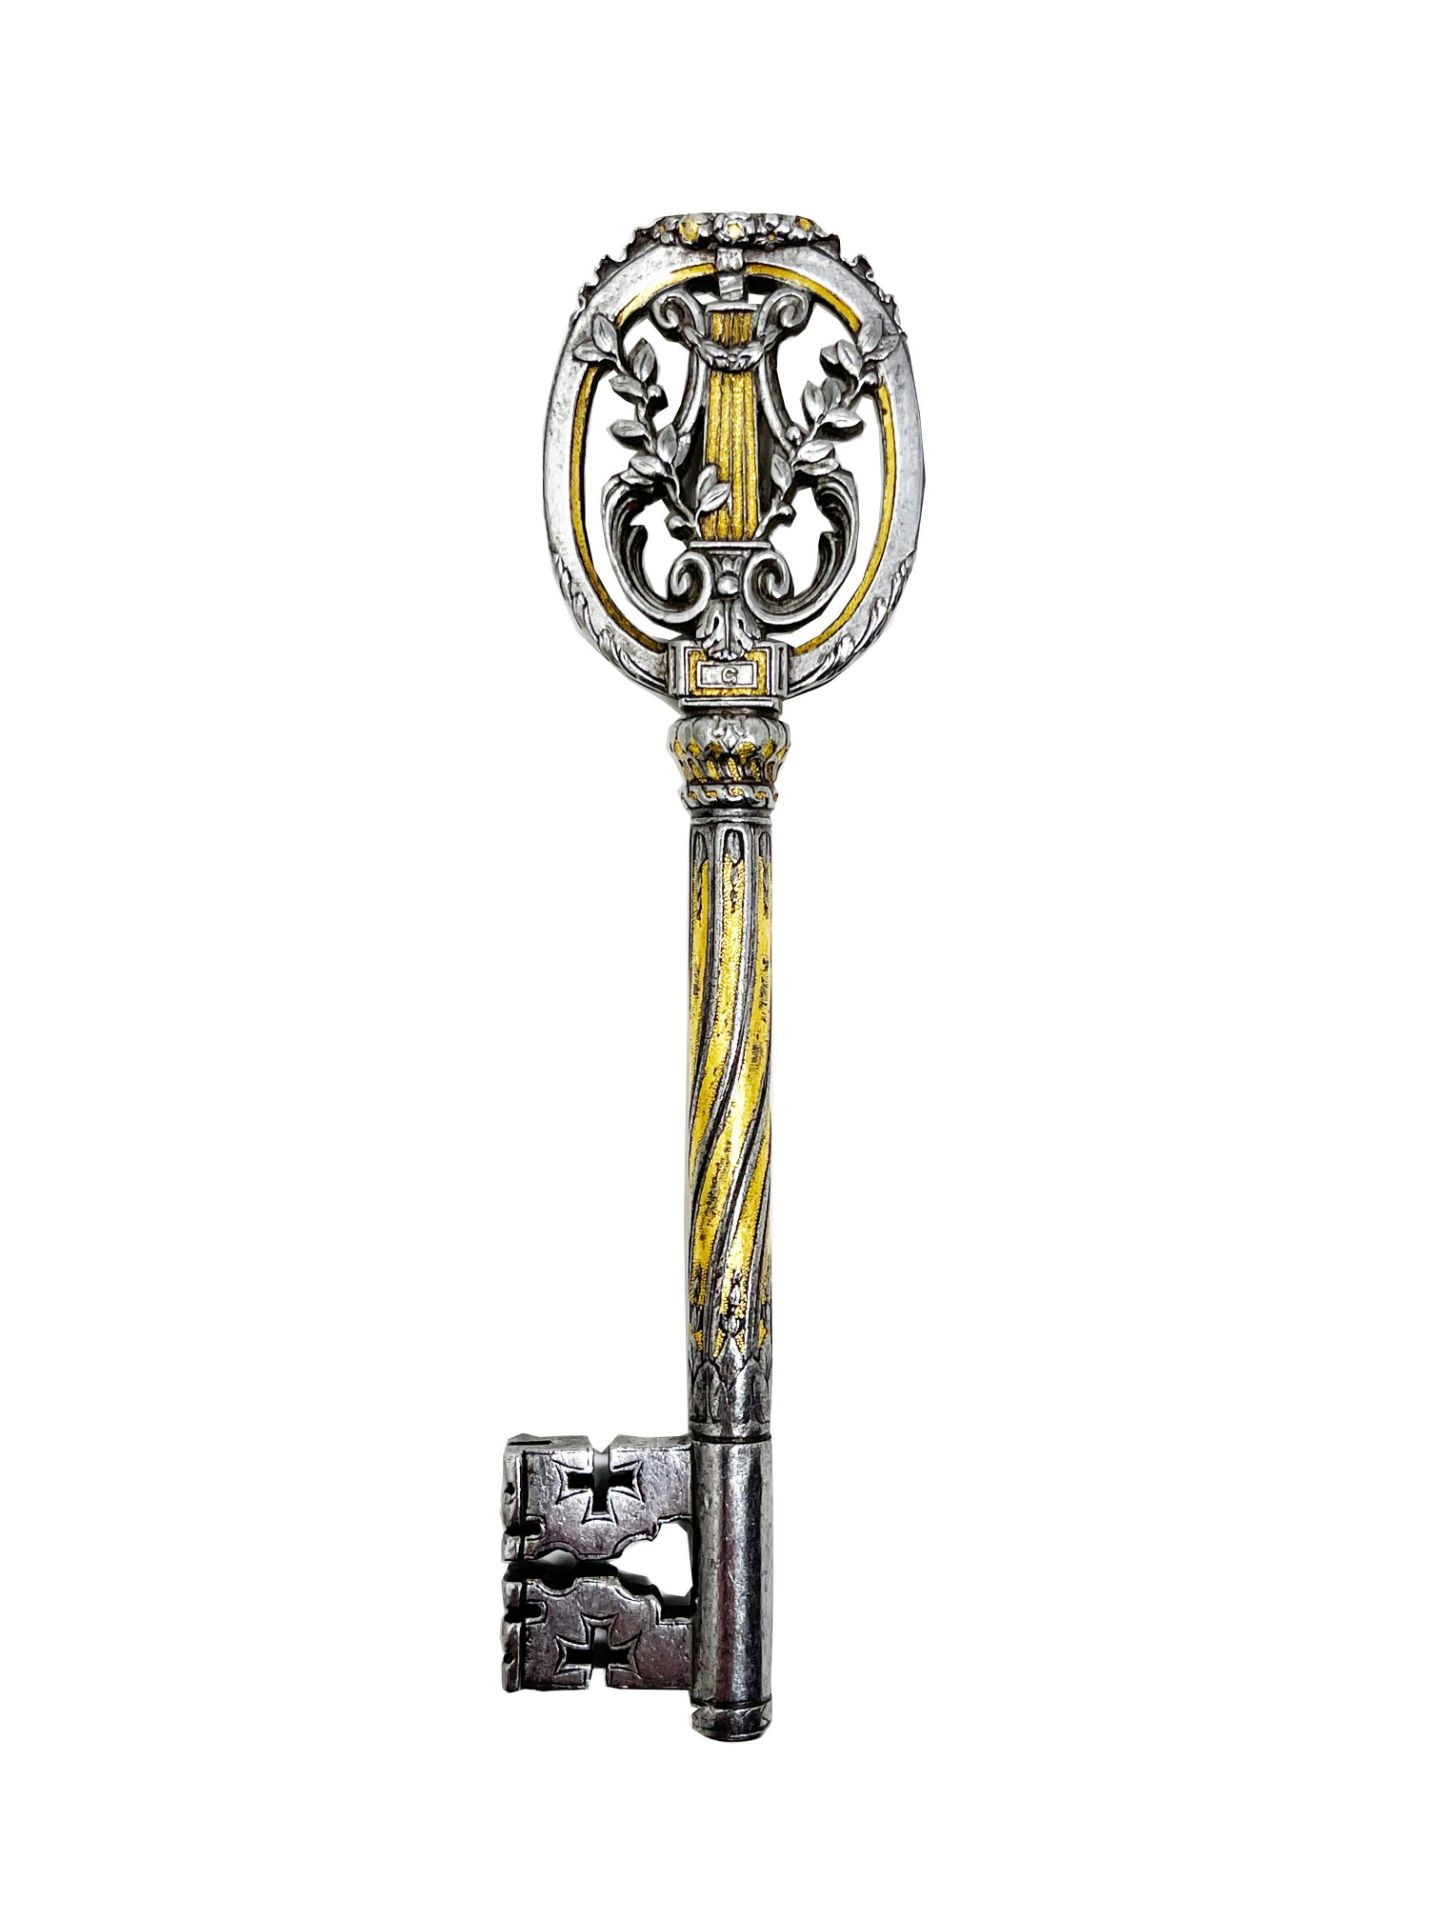 Iron key nielloed in gold. Oval ring topped by a wreath of flowers and containing a lyre and two